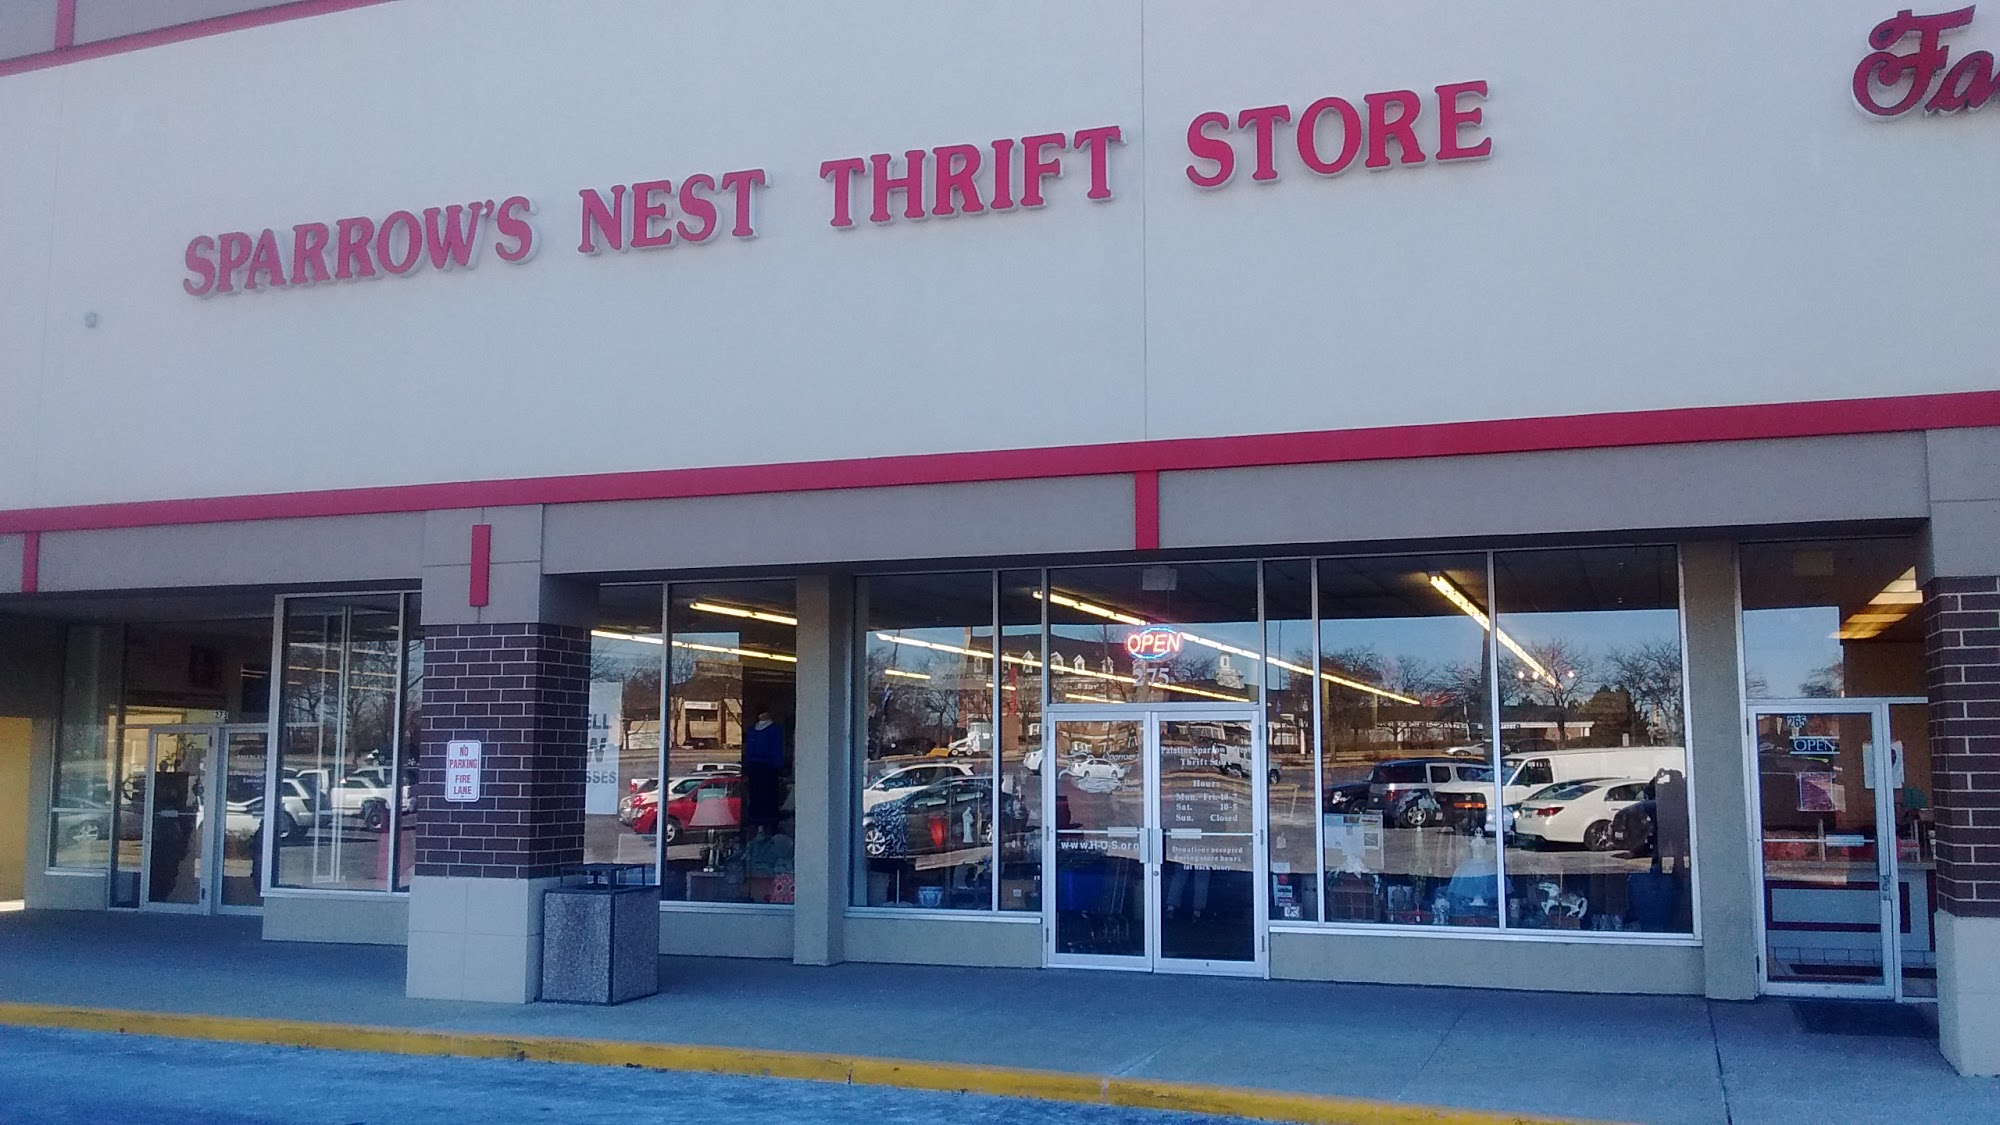 Sparrow's Nest Thrift Store and Donation Center